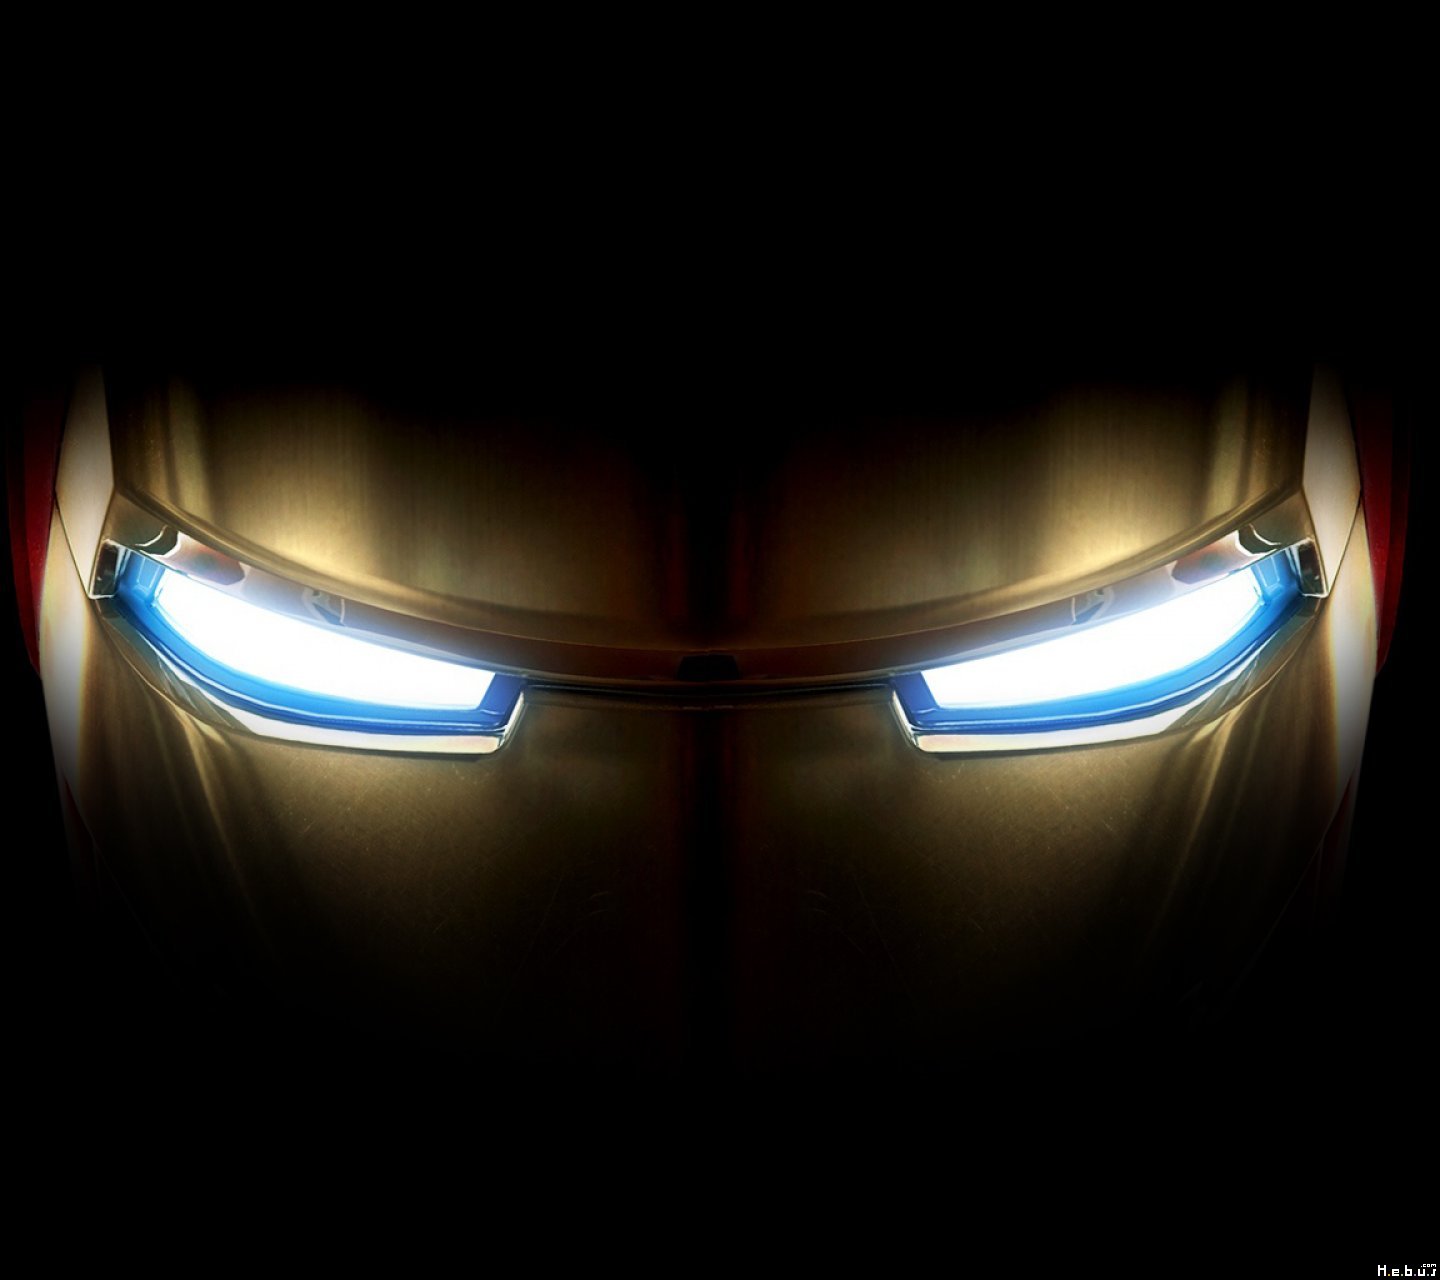 download the iron man hd wallpaper for your mobile device